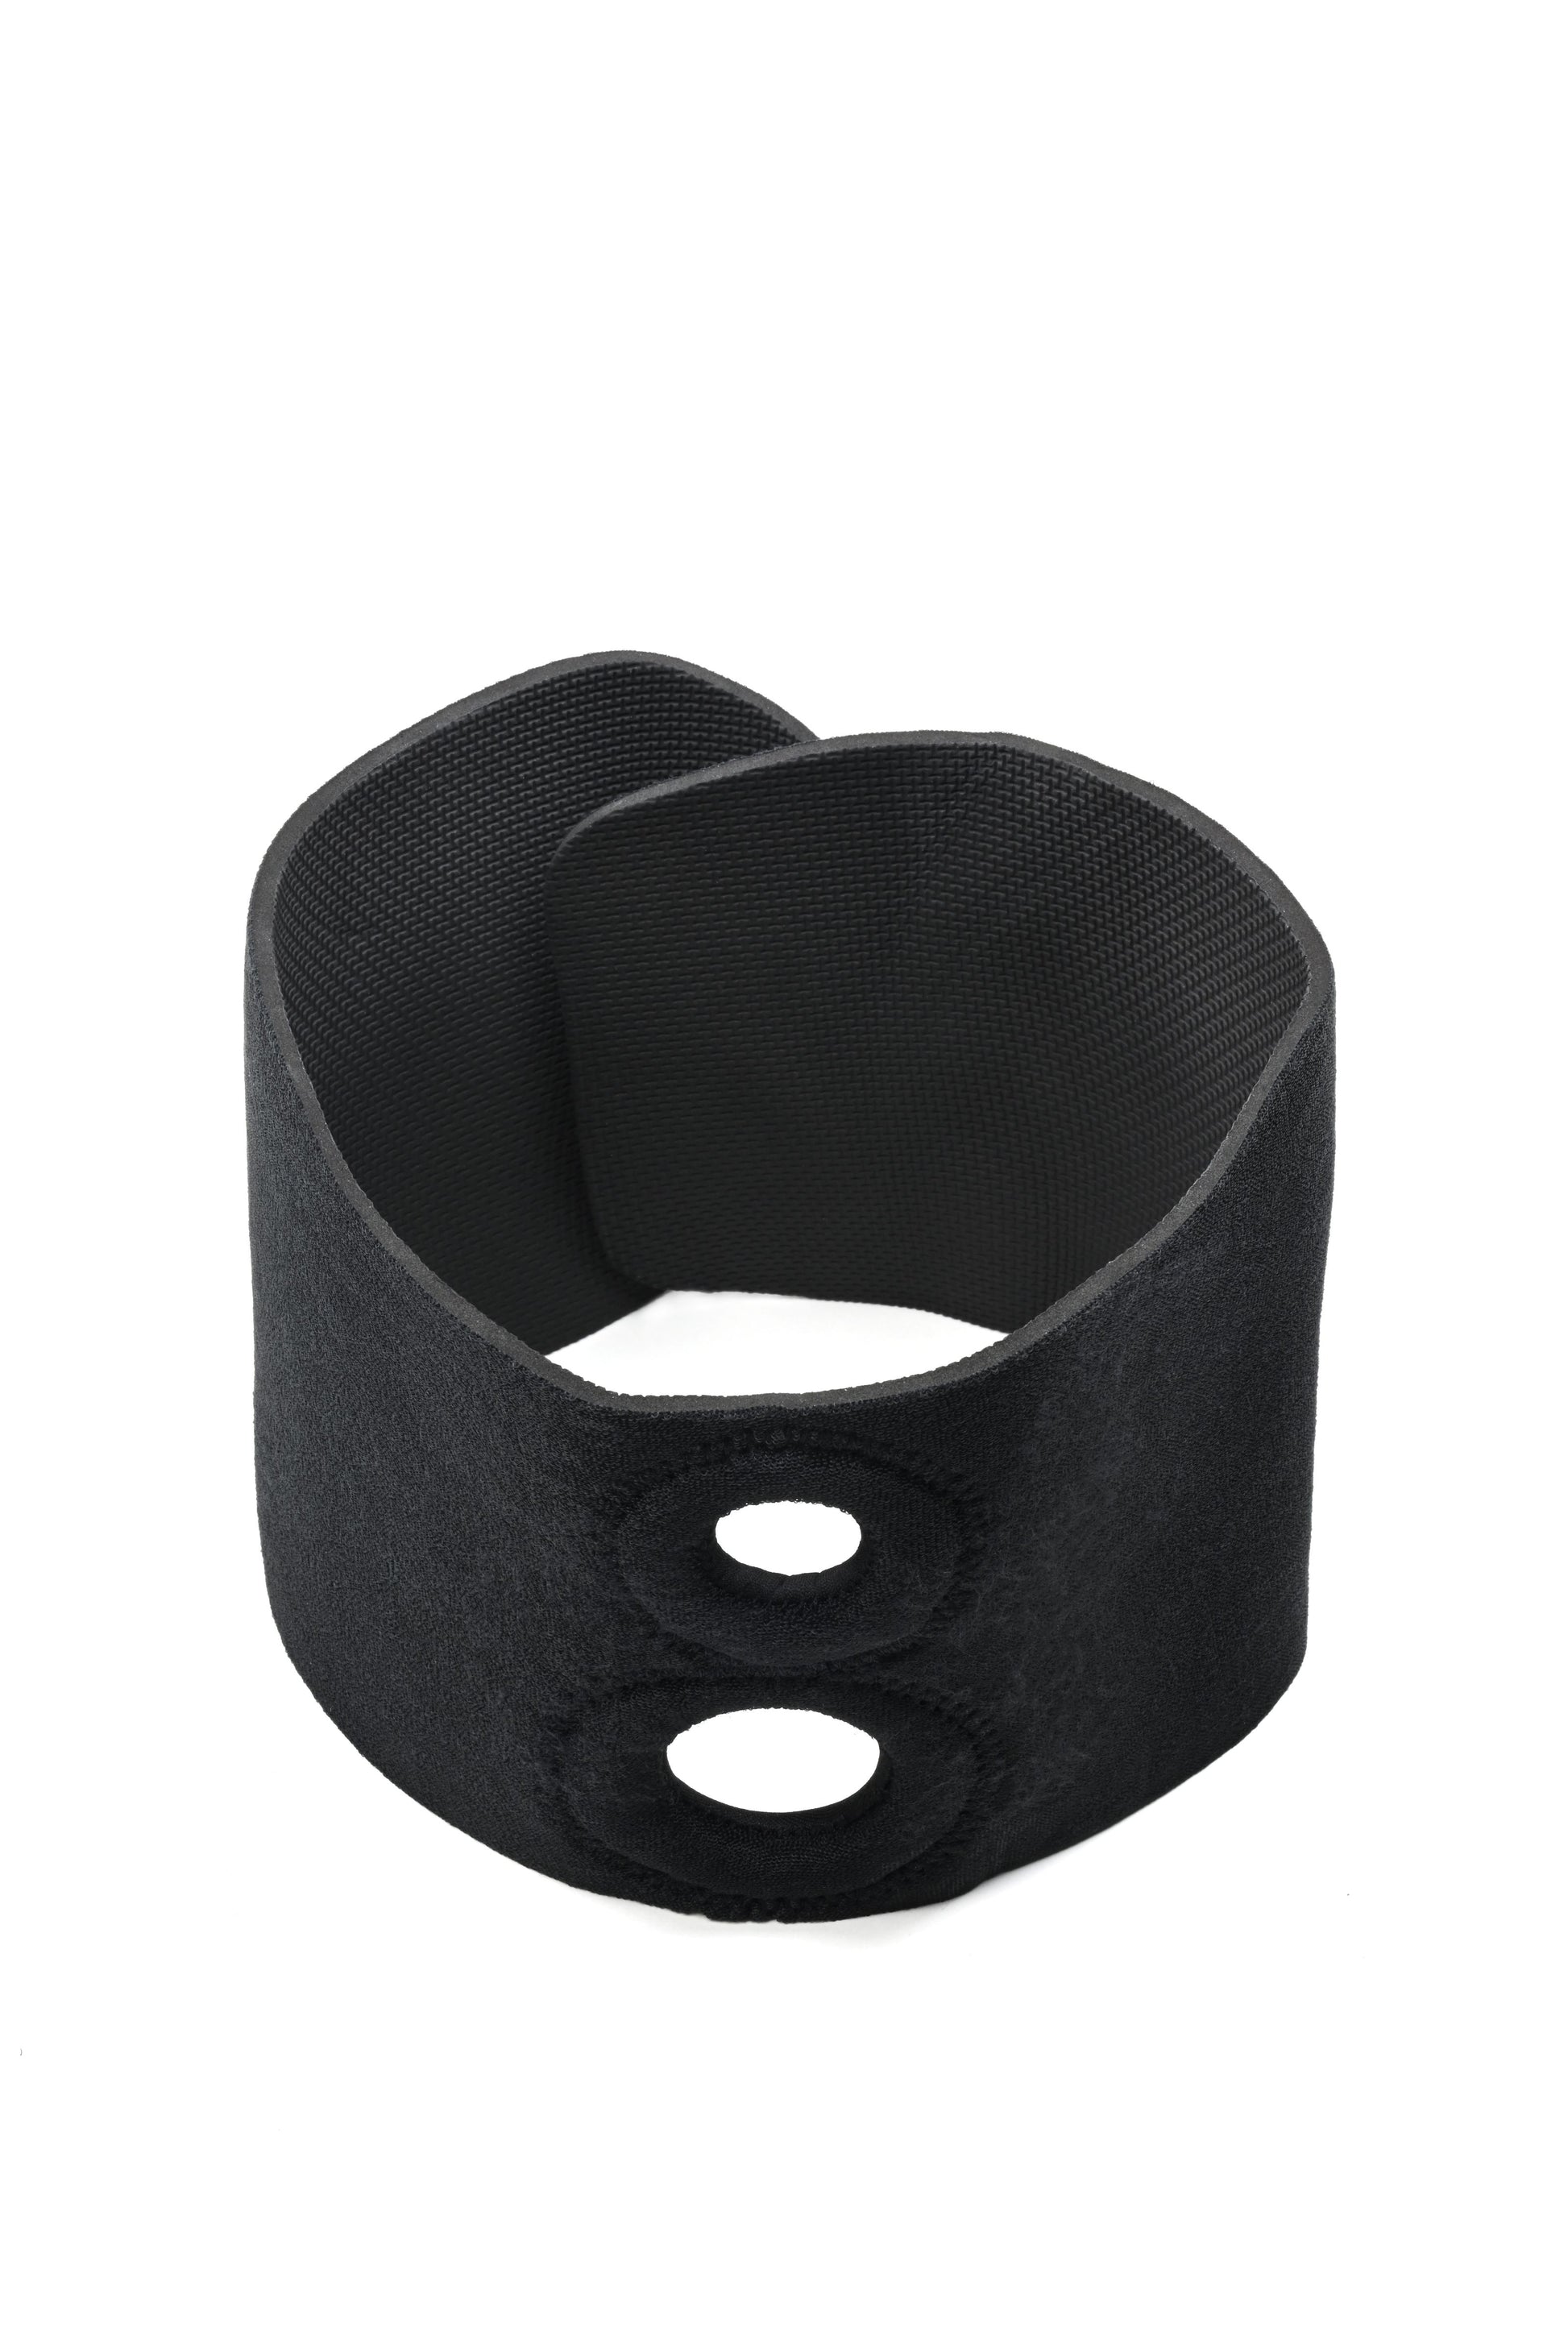 Front view of the Dual Penetration Thigh Adjustable Strap-On.